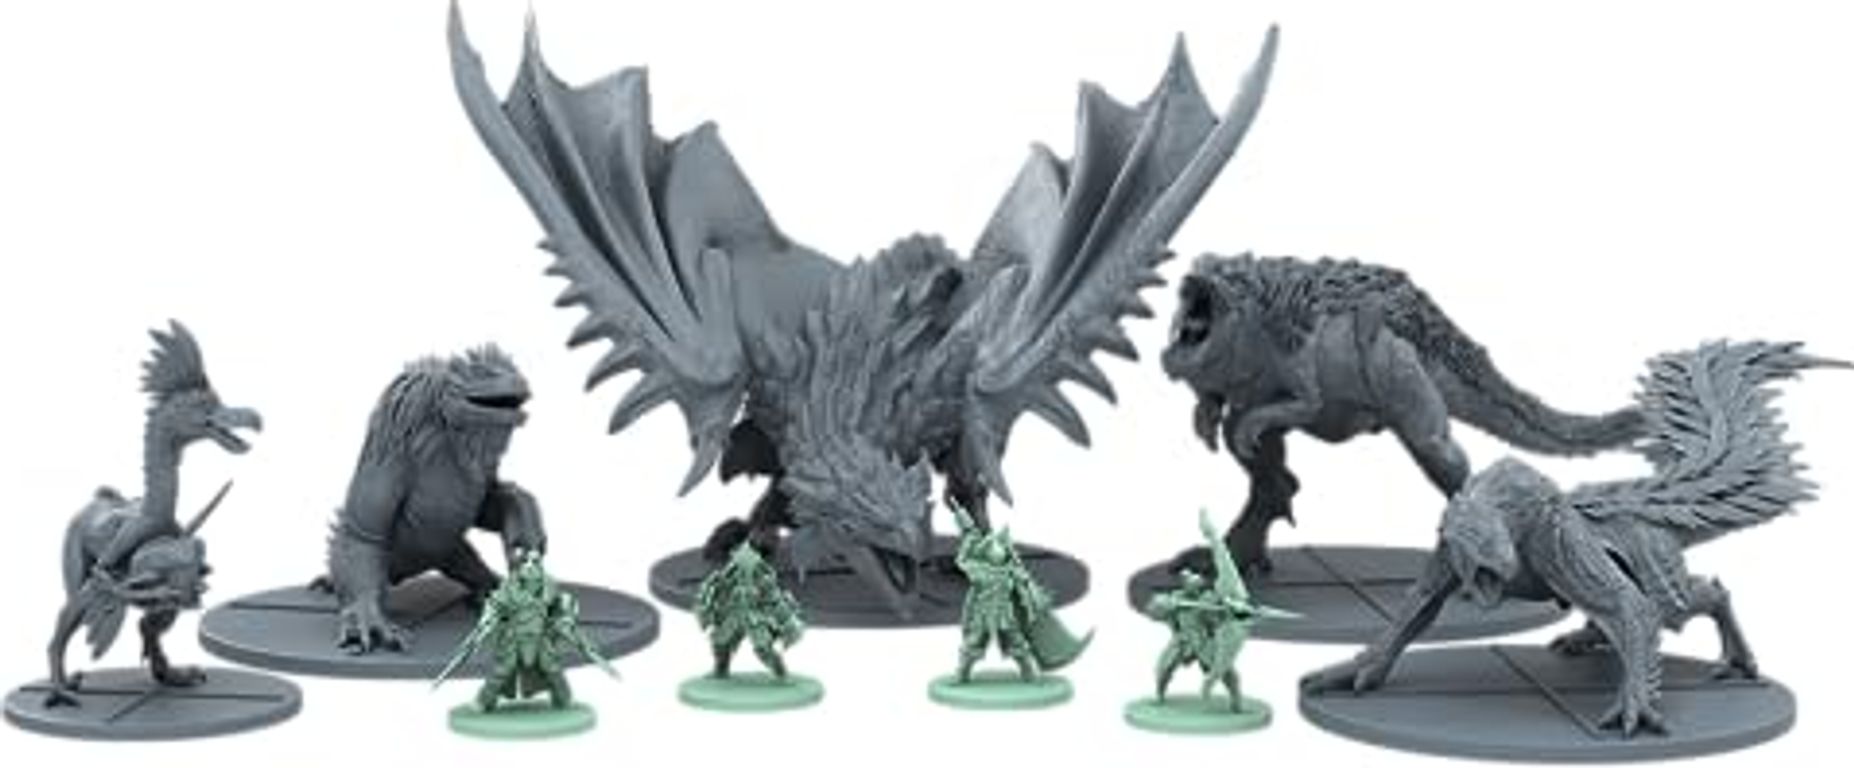 Monster Hunter World: The Board Game miniatures